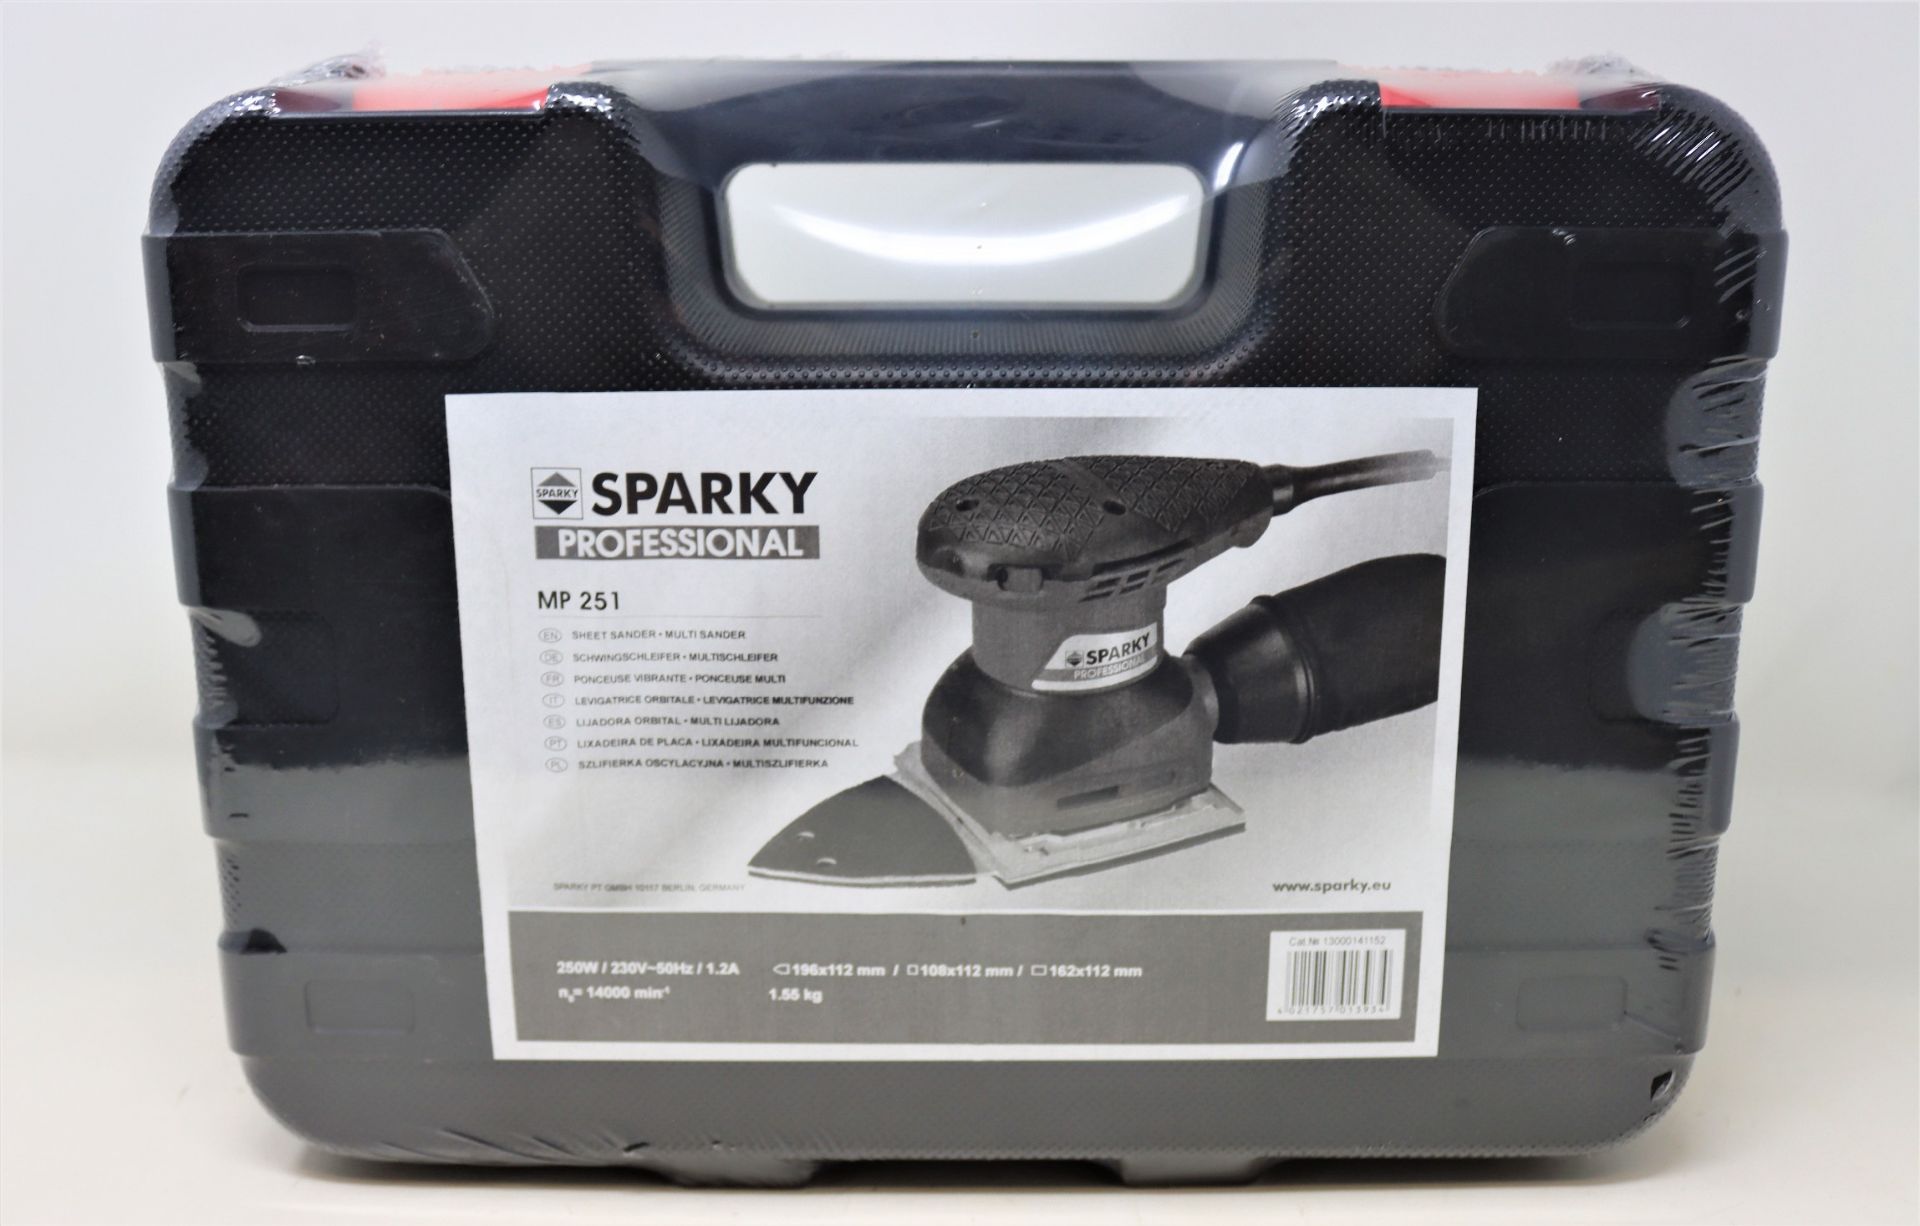 An as new Sparky professional sander (MP251) and two packs of Sparky sanding papers.